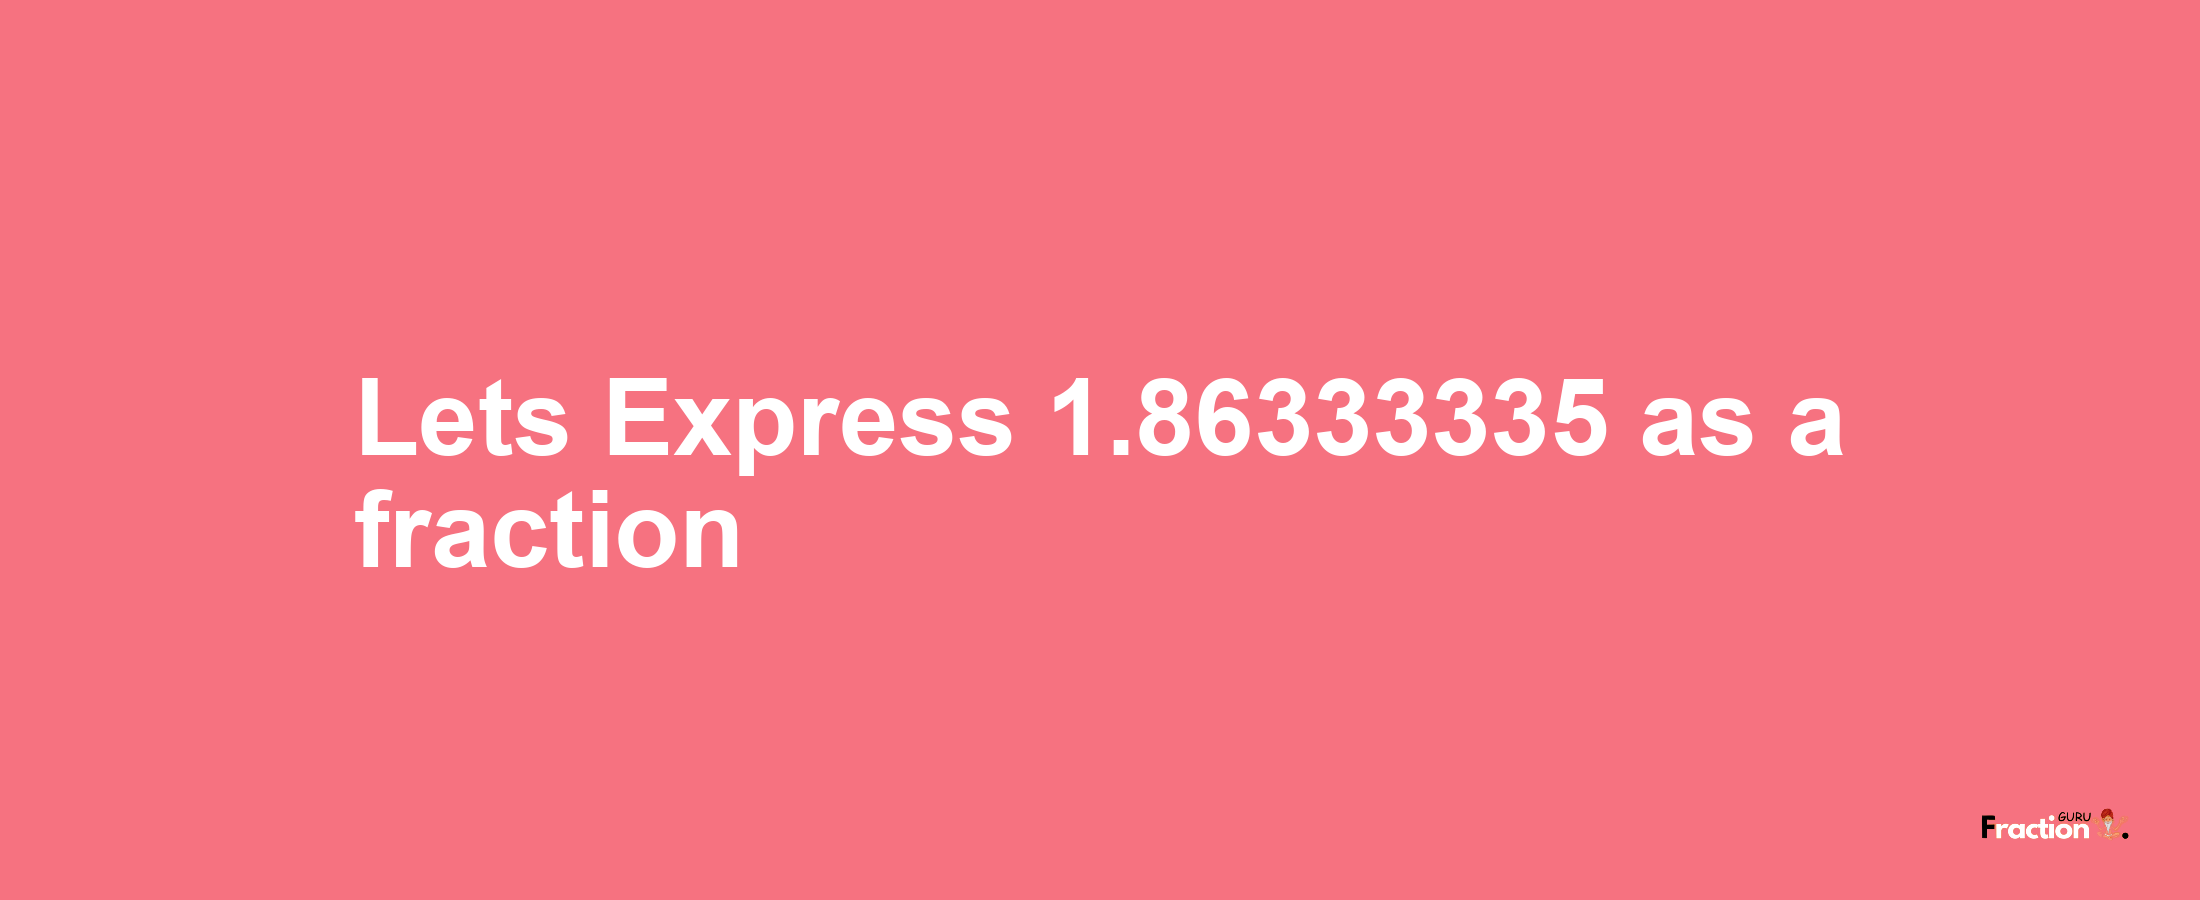 Lets Express 1.86333335 as afraction